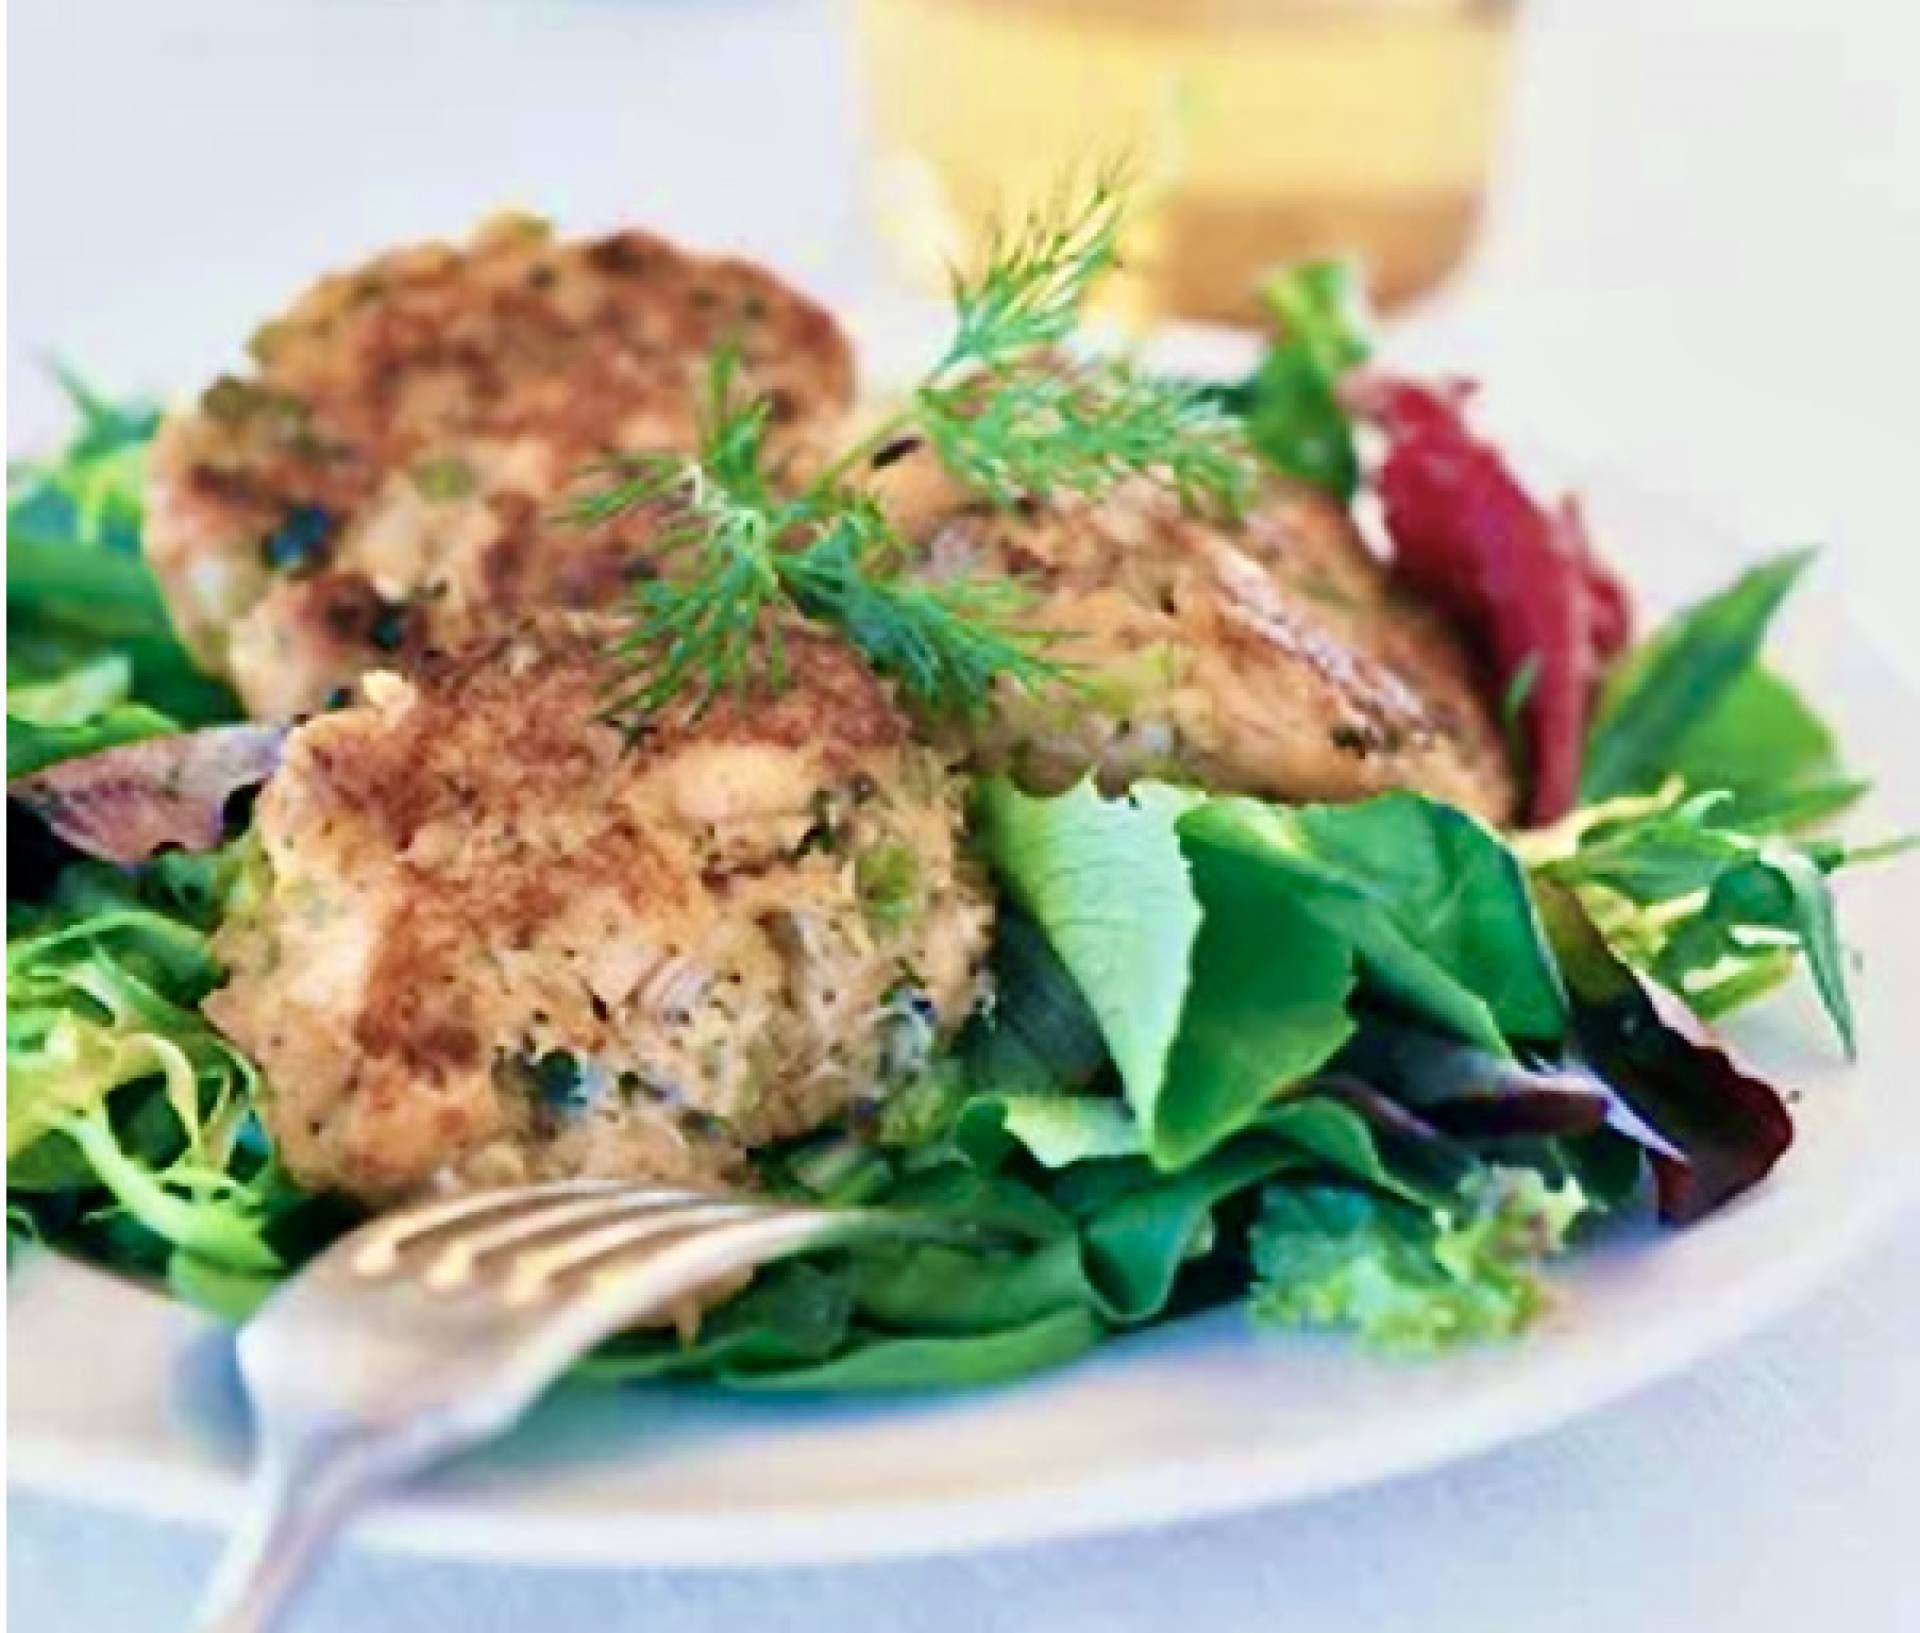 Salmon Cakes over Spring Mix Salad